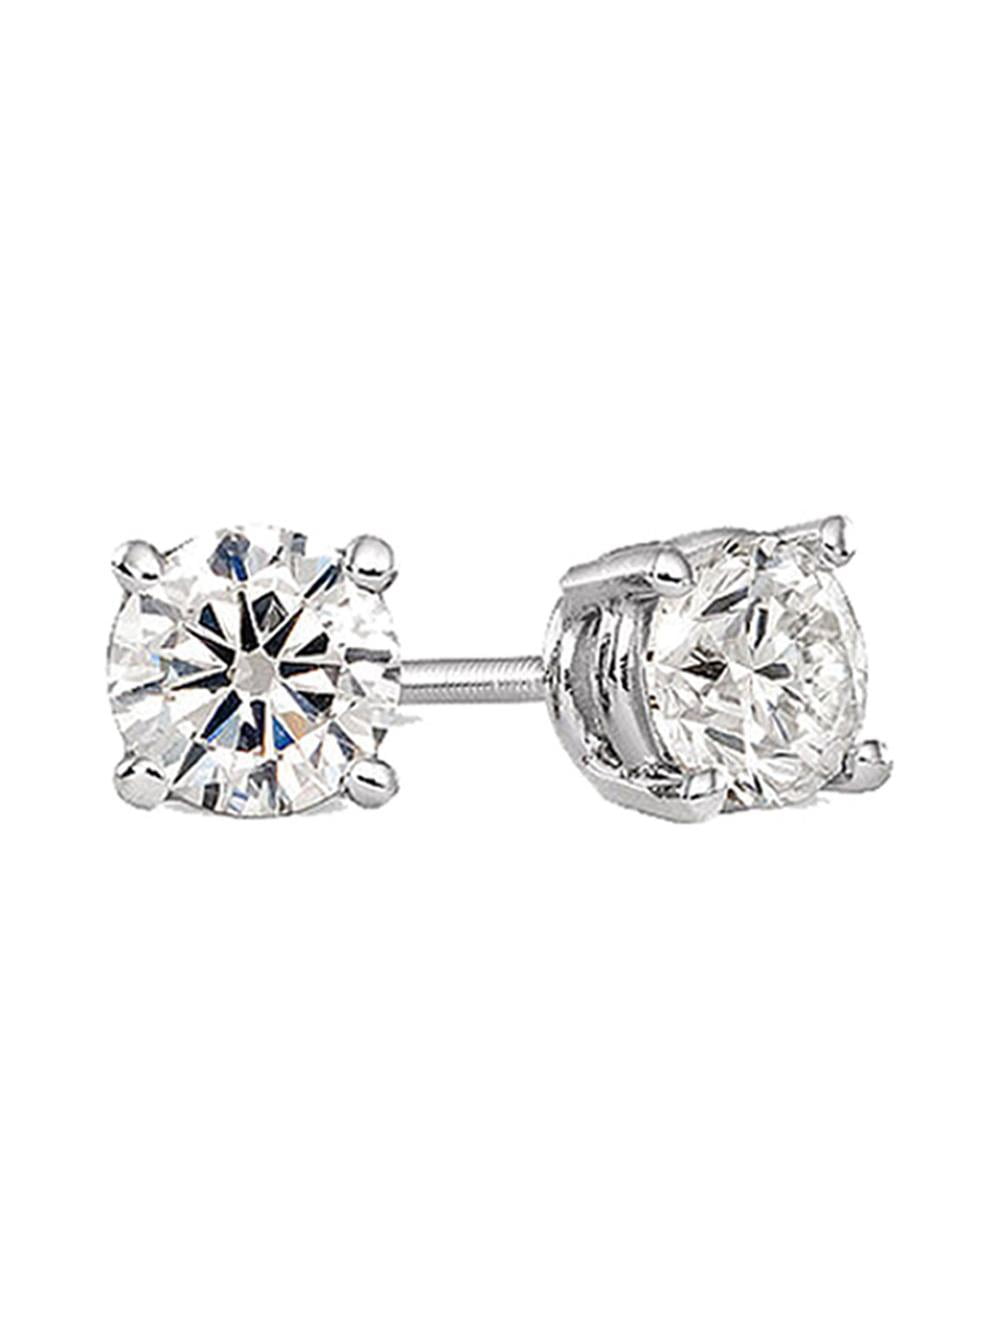 14k White Gold 4mm Round CZ Solitaire Basket Setting Stud Earrings